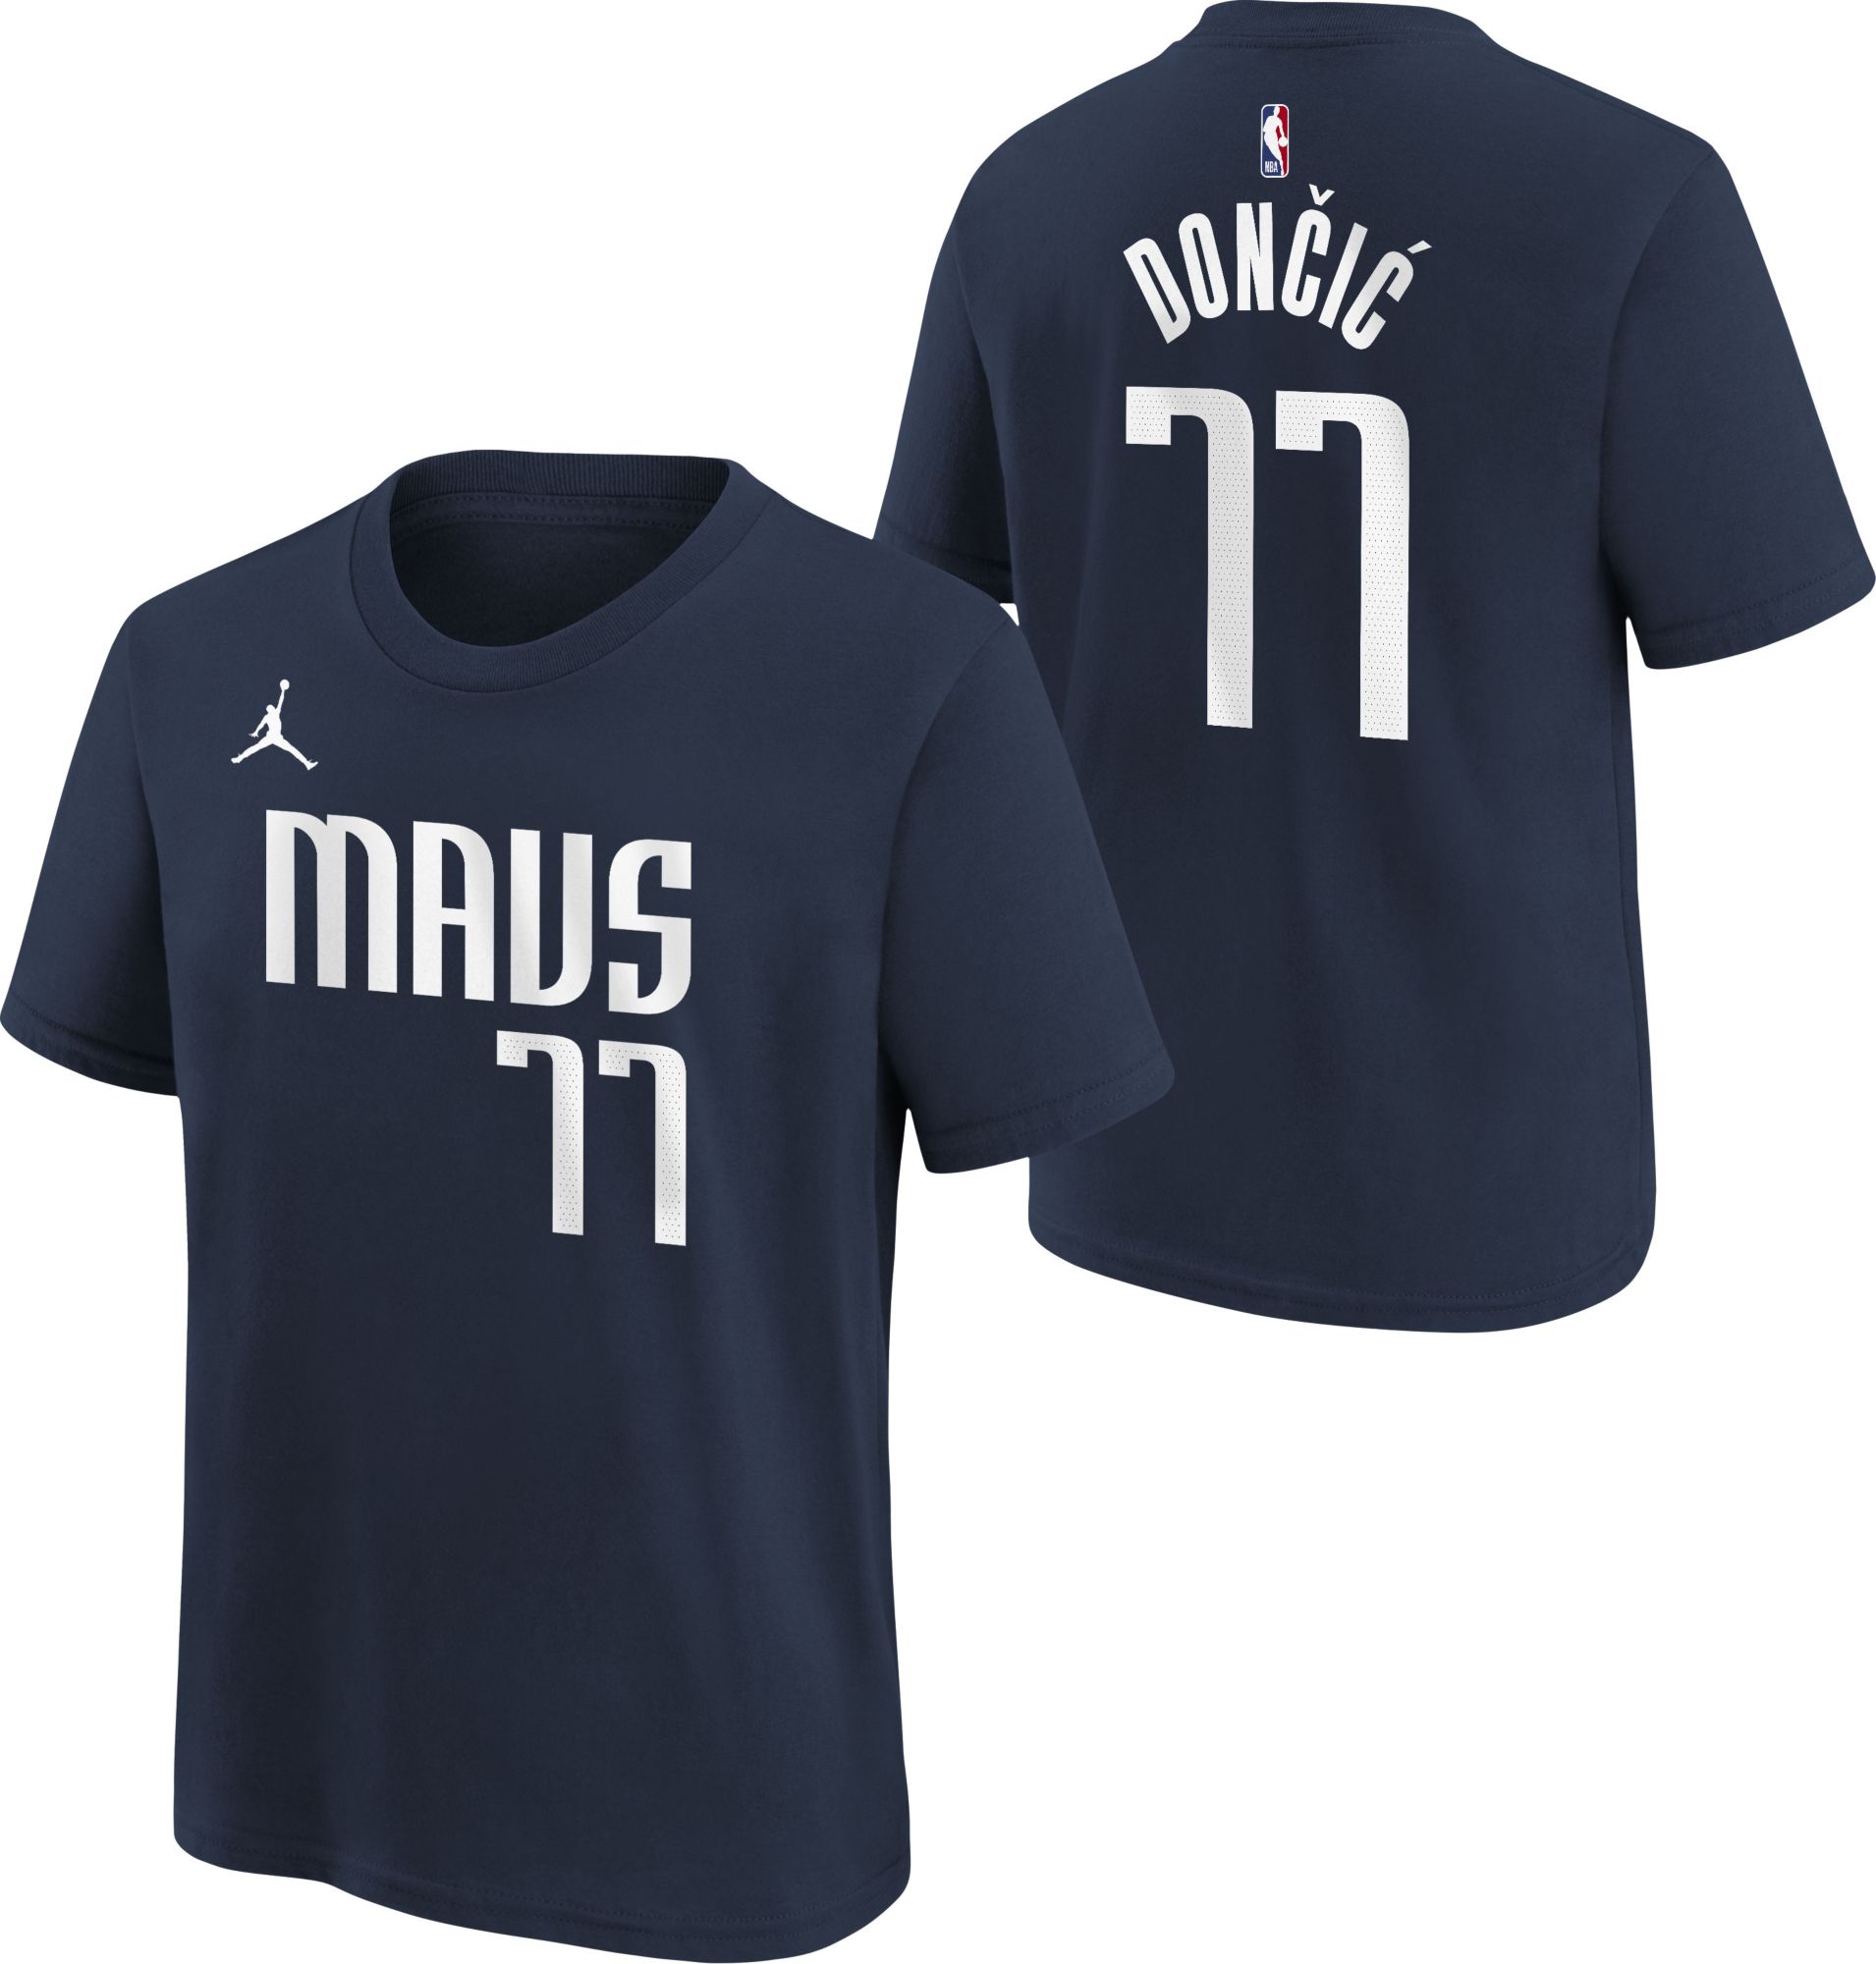 luka doncic jersey city edition